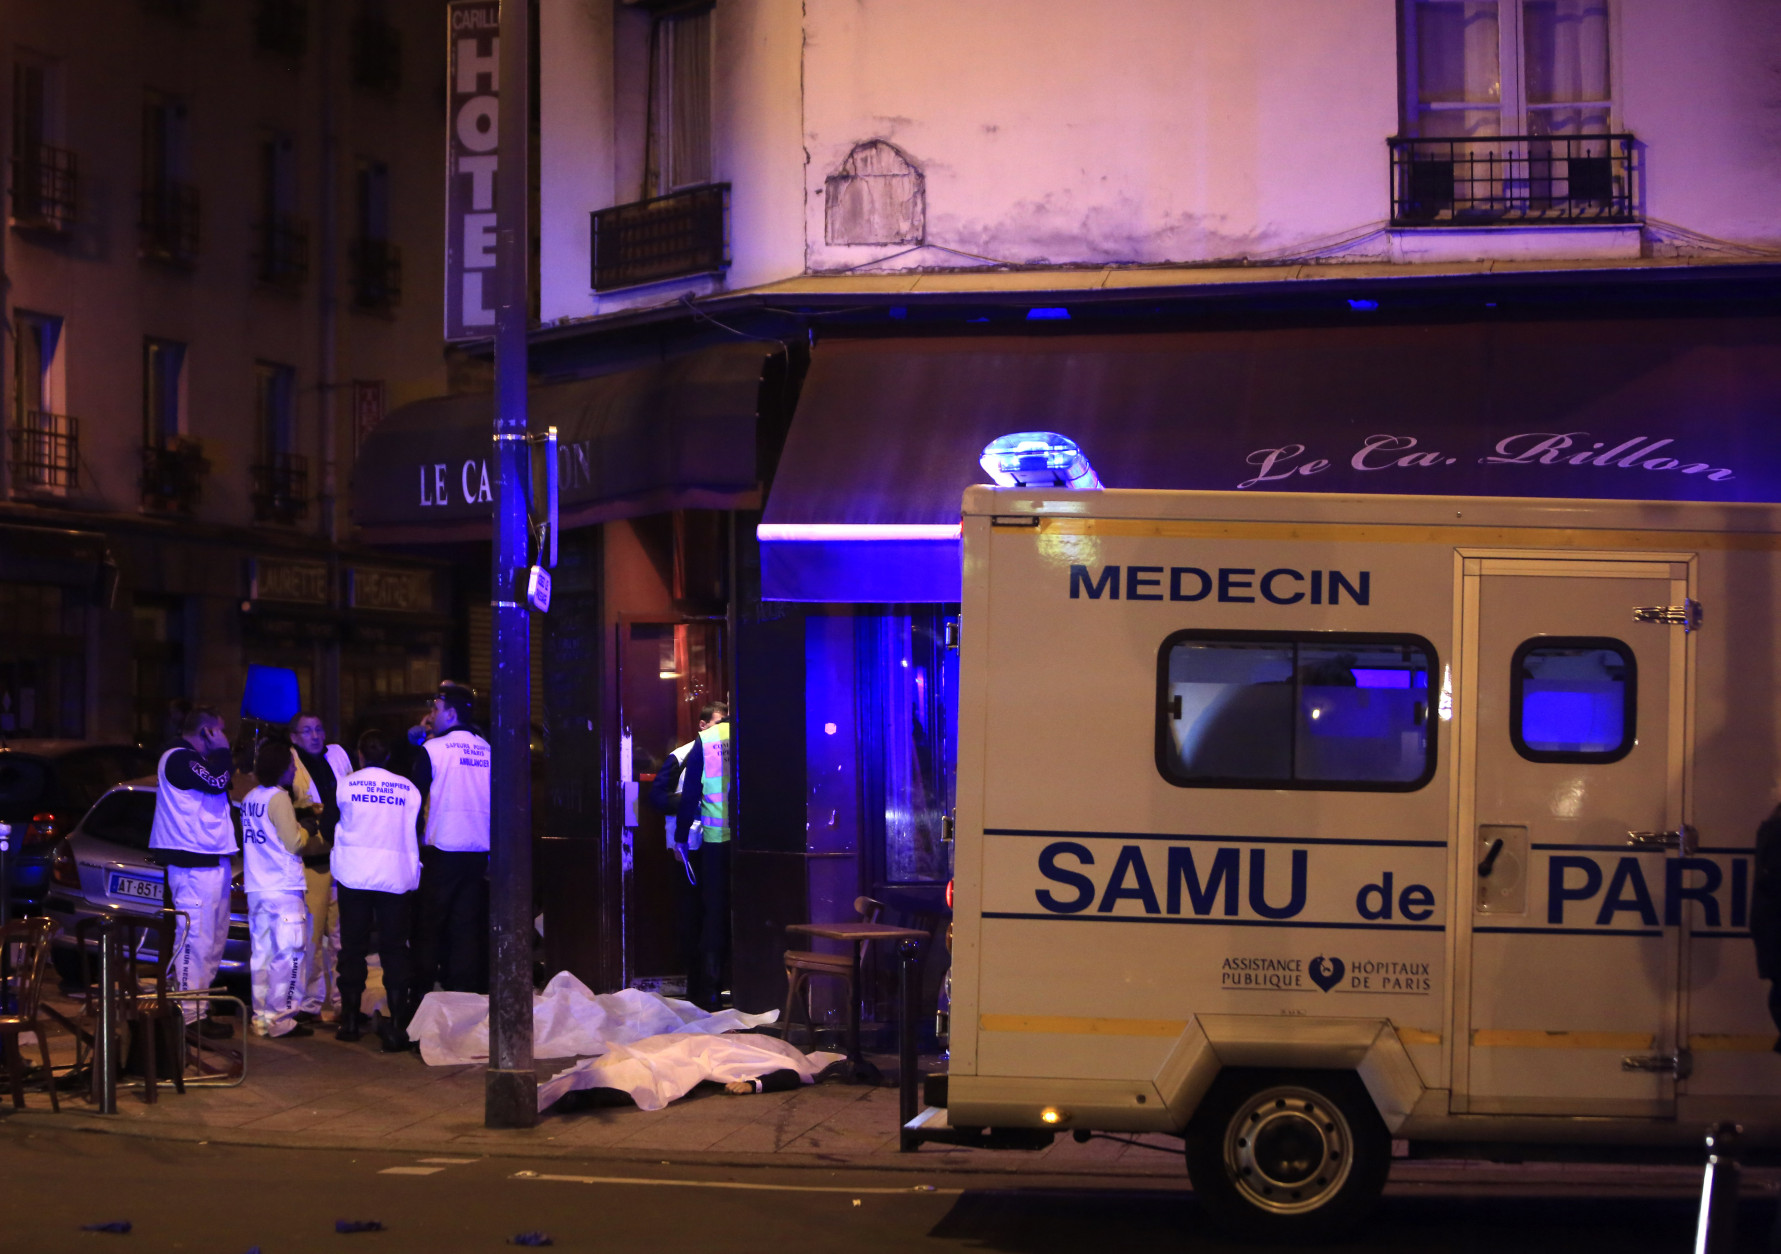 Medical staff stand by victims in a Paris restaurant, Friday, Nov. 13, 2015. Two police officials say at least 11 people have been killed in shootouts and other violence around Paris. Police have reported shootouts in at least two restaurants in Paris. At least two explosions have been heard near the Stade de France stadium, and French media is reporting of a hostage-taking in the capital. (AP Photo/Thibault Camus)